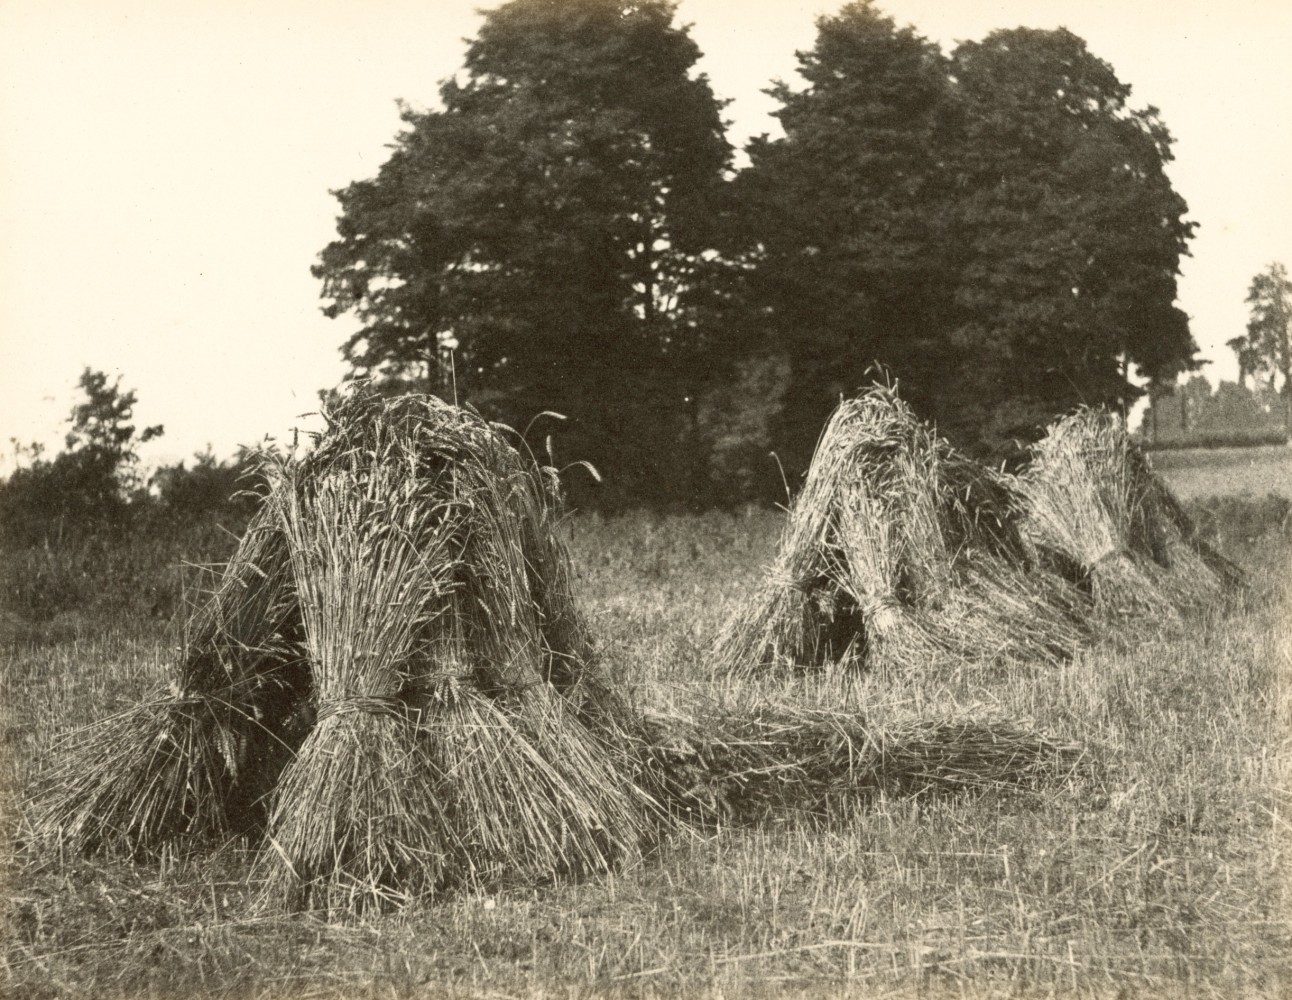 Hugh OWEN (English, 1808-1897) Harvest scene with stooks and trees Albumen print, 1860s-1870s, from a paper negative, before 1855 17.3 x 22.1 cm mounted on 26.0 x 28.3 cm album sheet Numbered &quot;75&quot; in pencil on mount